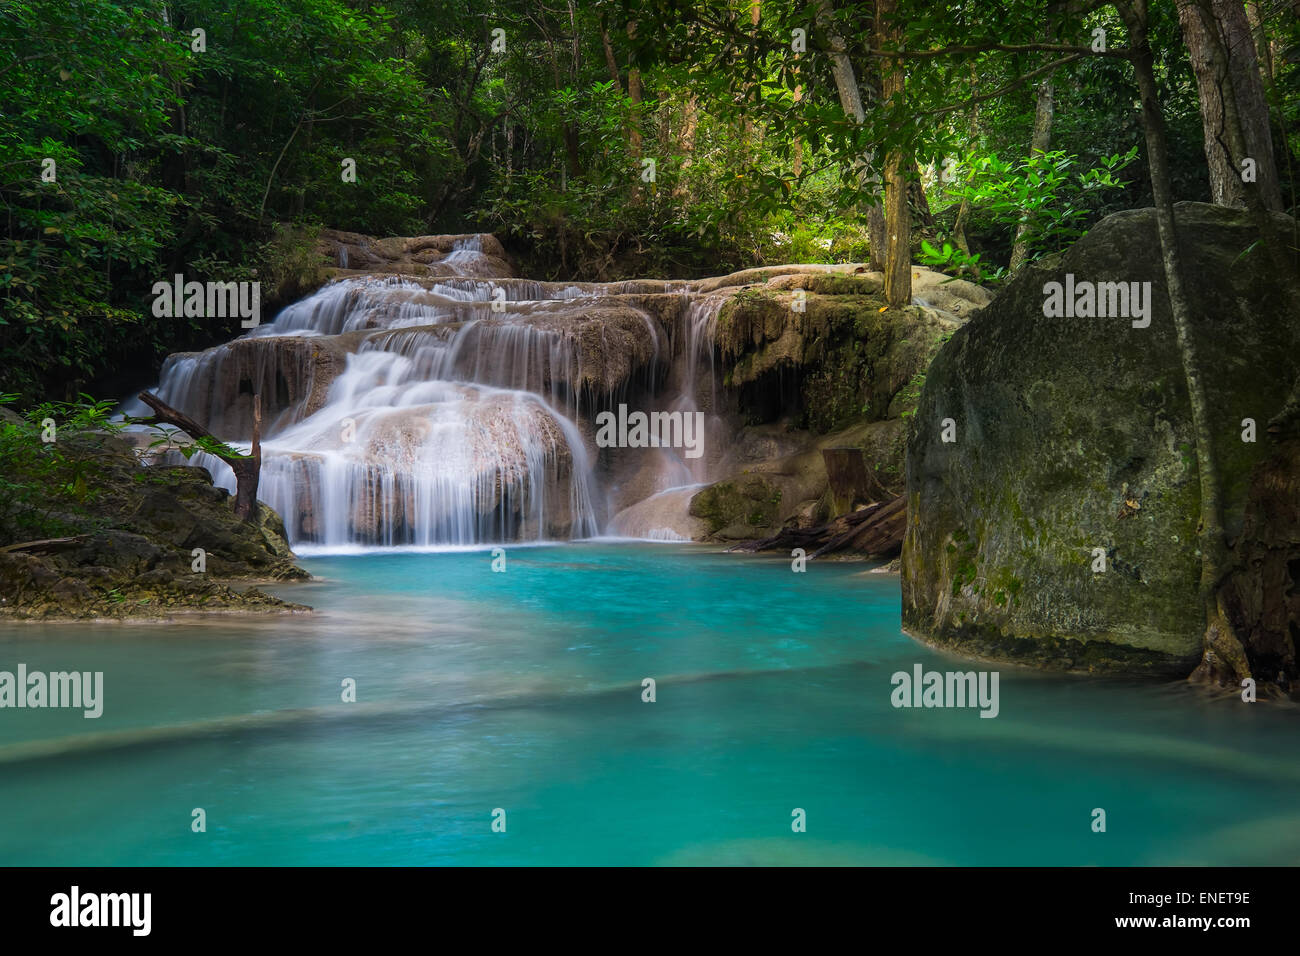 Jangle landscape with flowing turquoise water of Erawan cascade waterfall at deep tropical rain forest. National Park Kanchanabu Stock Photo